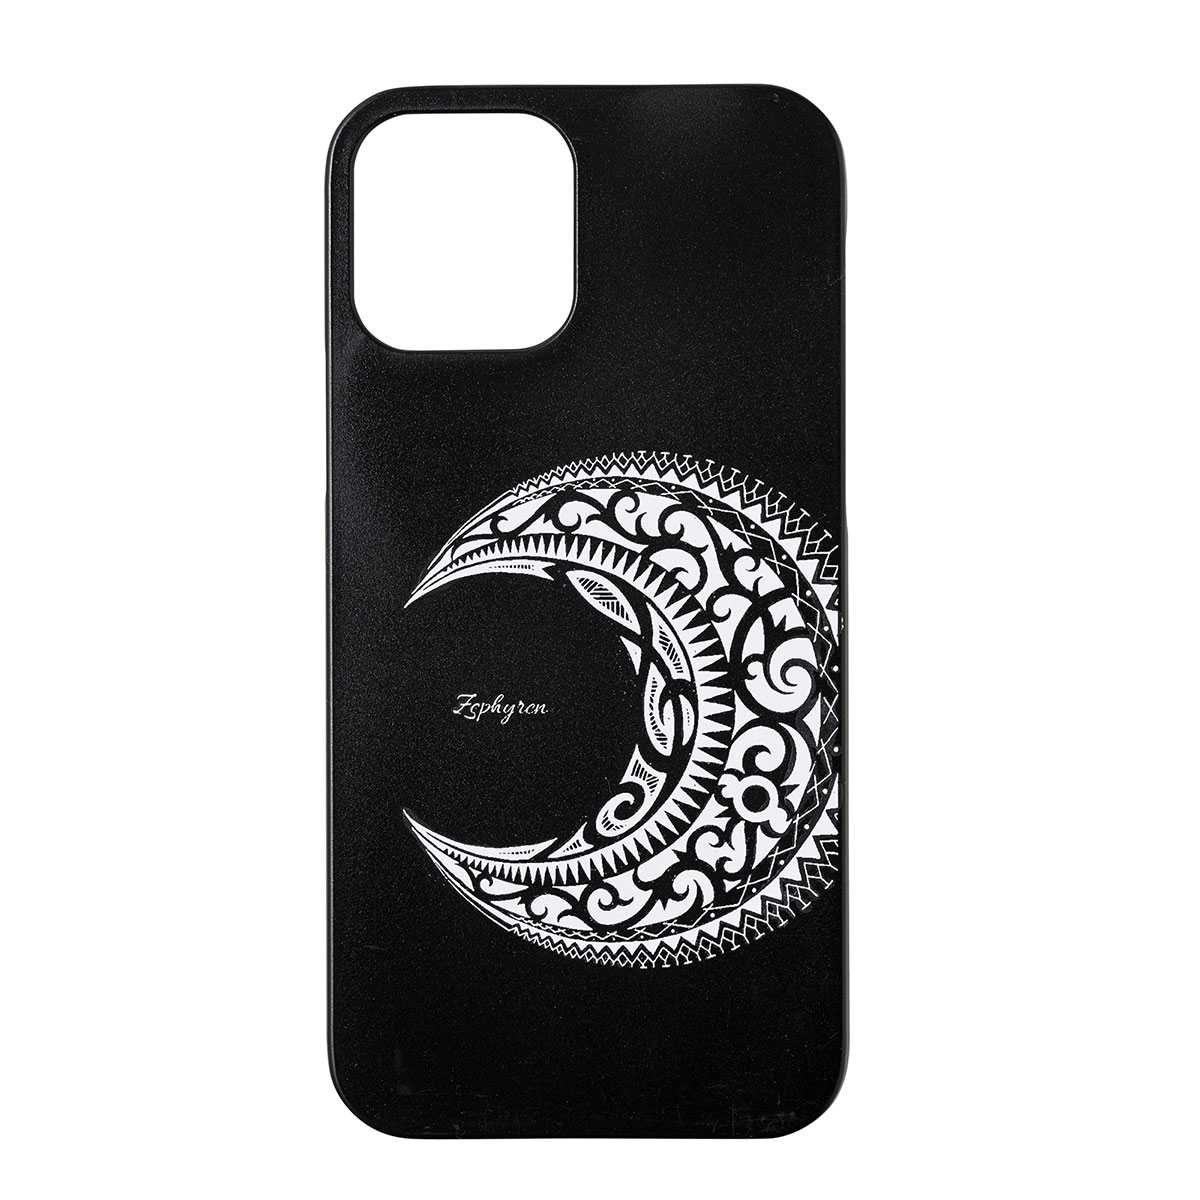 iPhone CASE -MOON- iPHONE 13 Pro Max